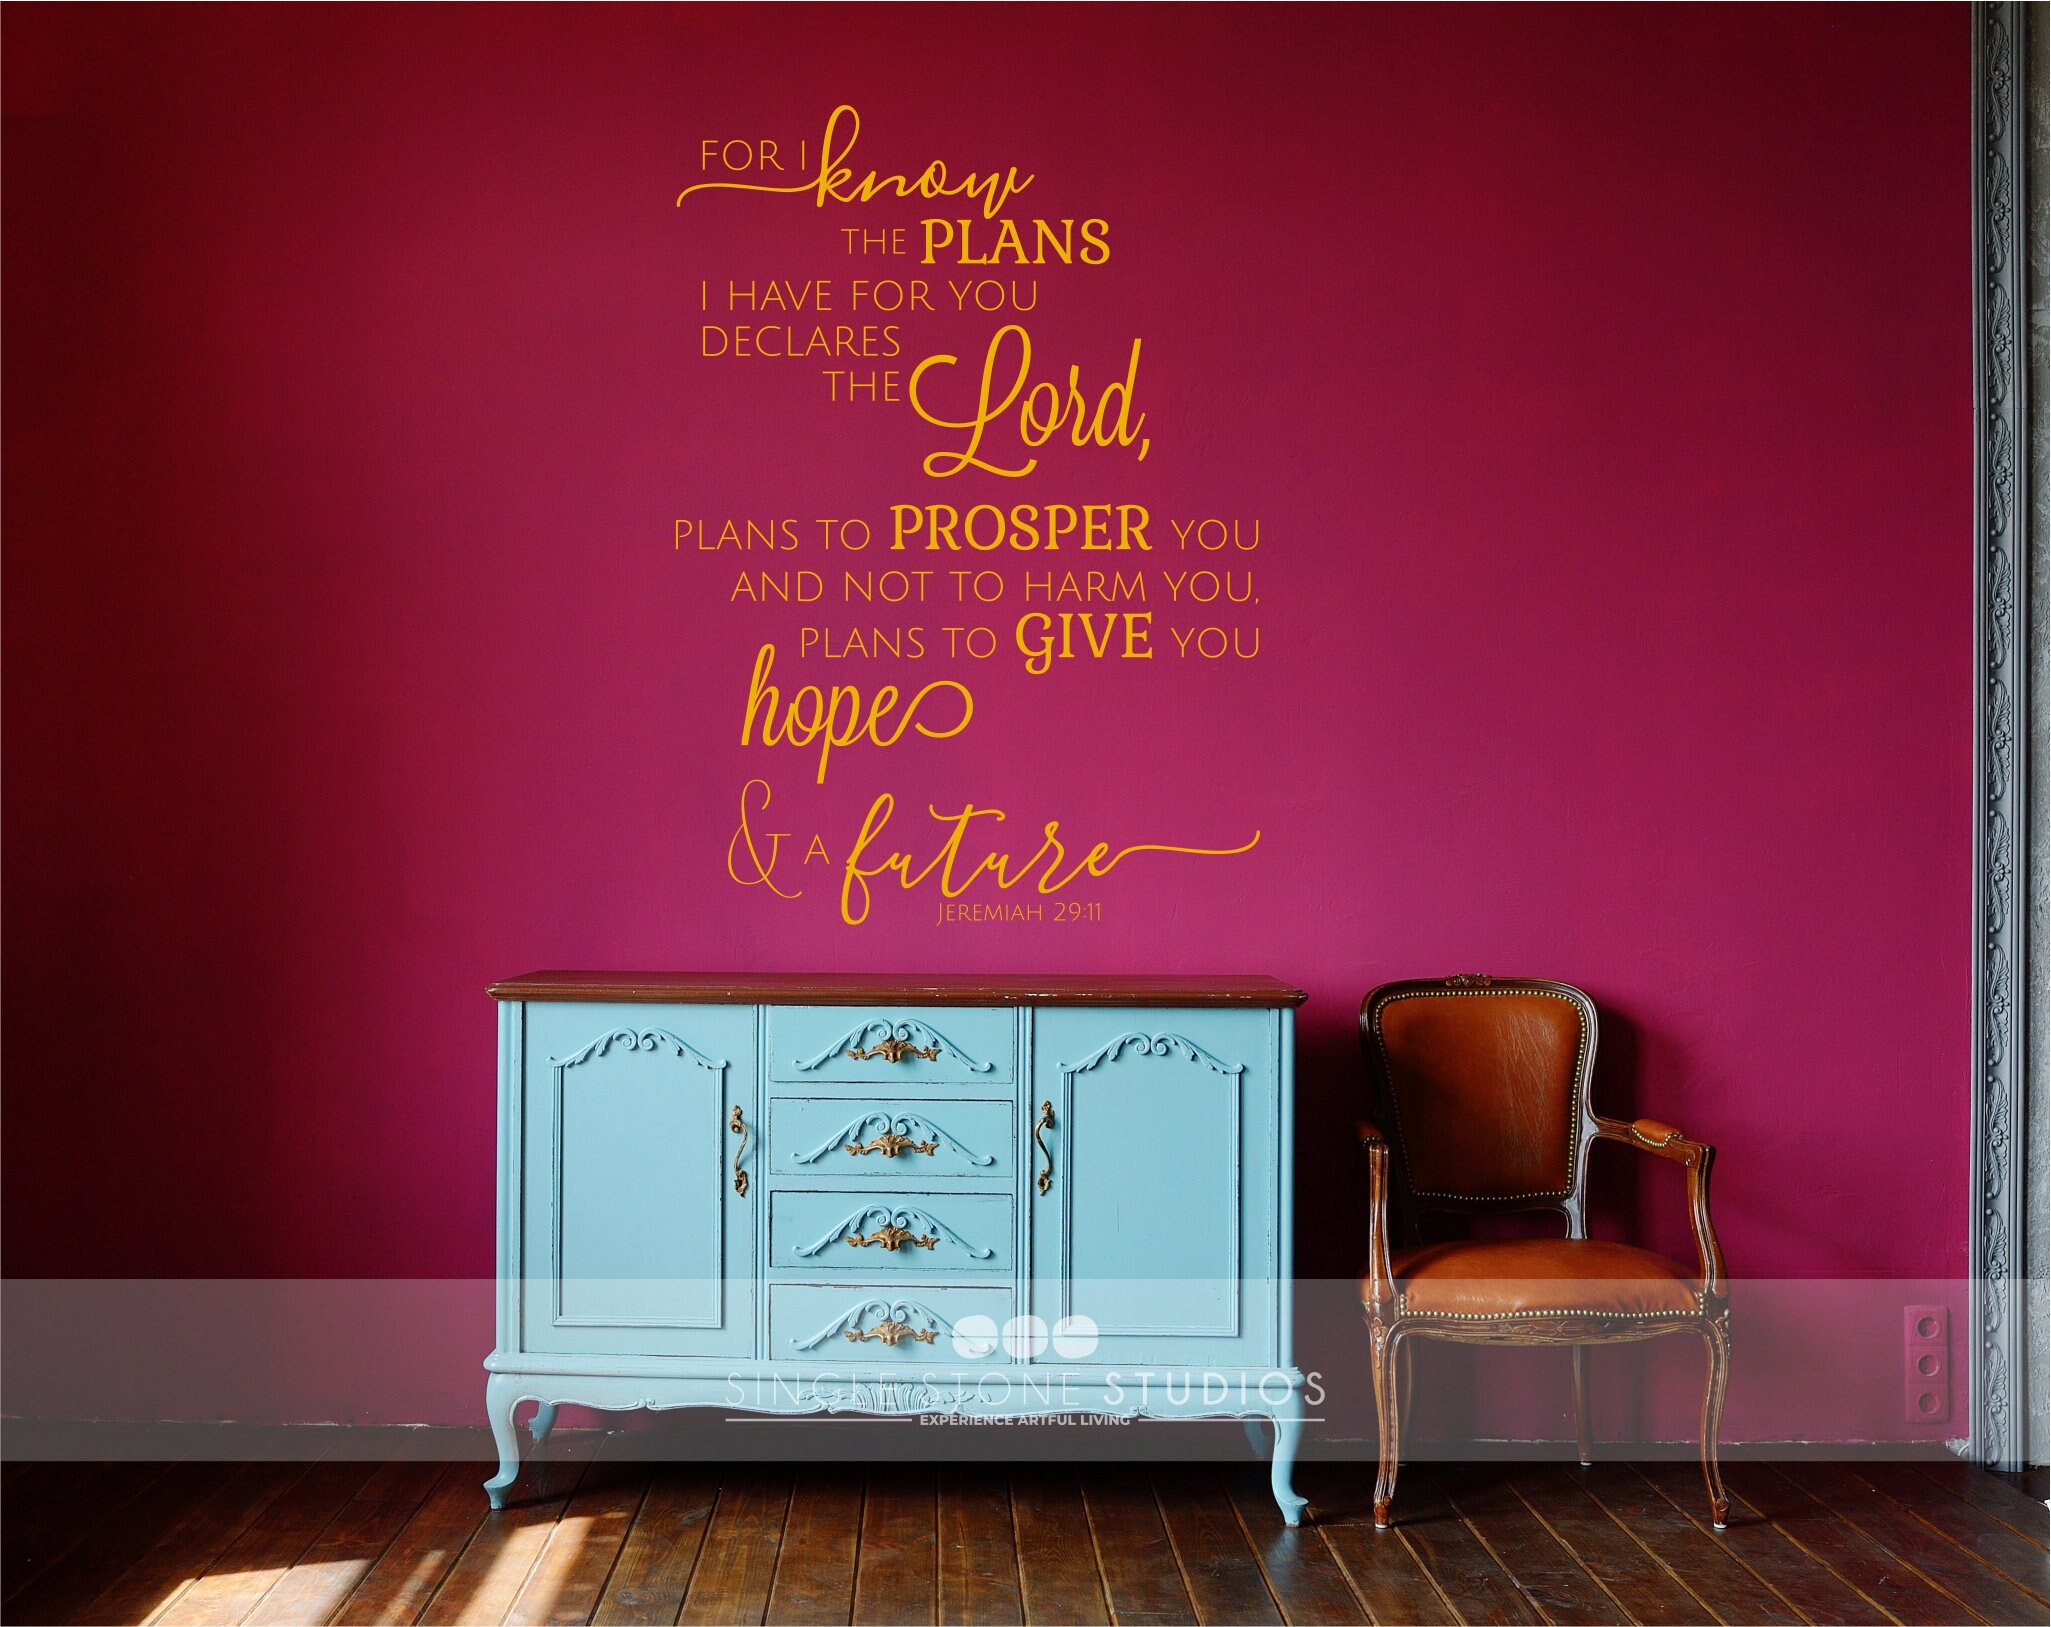 Jeremiah 29:11 Bible Verse Wall Vinyl Wall Stickers Art Diy Quote Window  Home Living Room Decal Church Poster - Wall Stickers - AliExpress